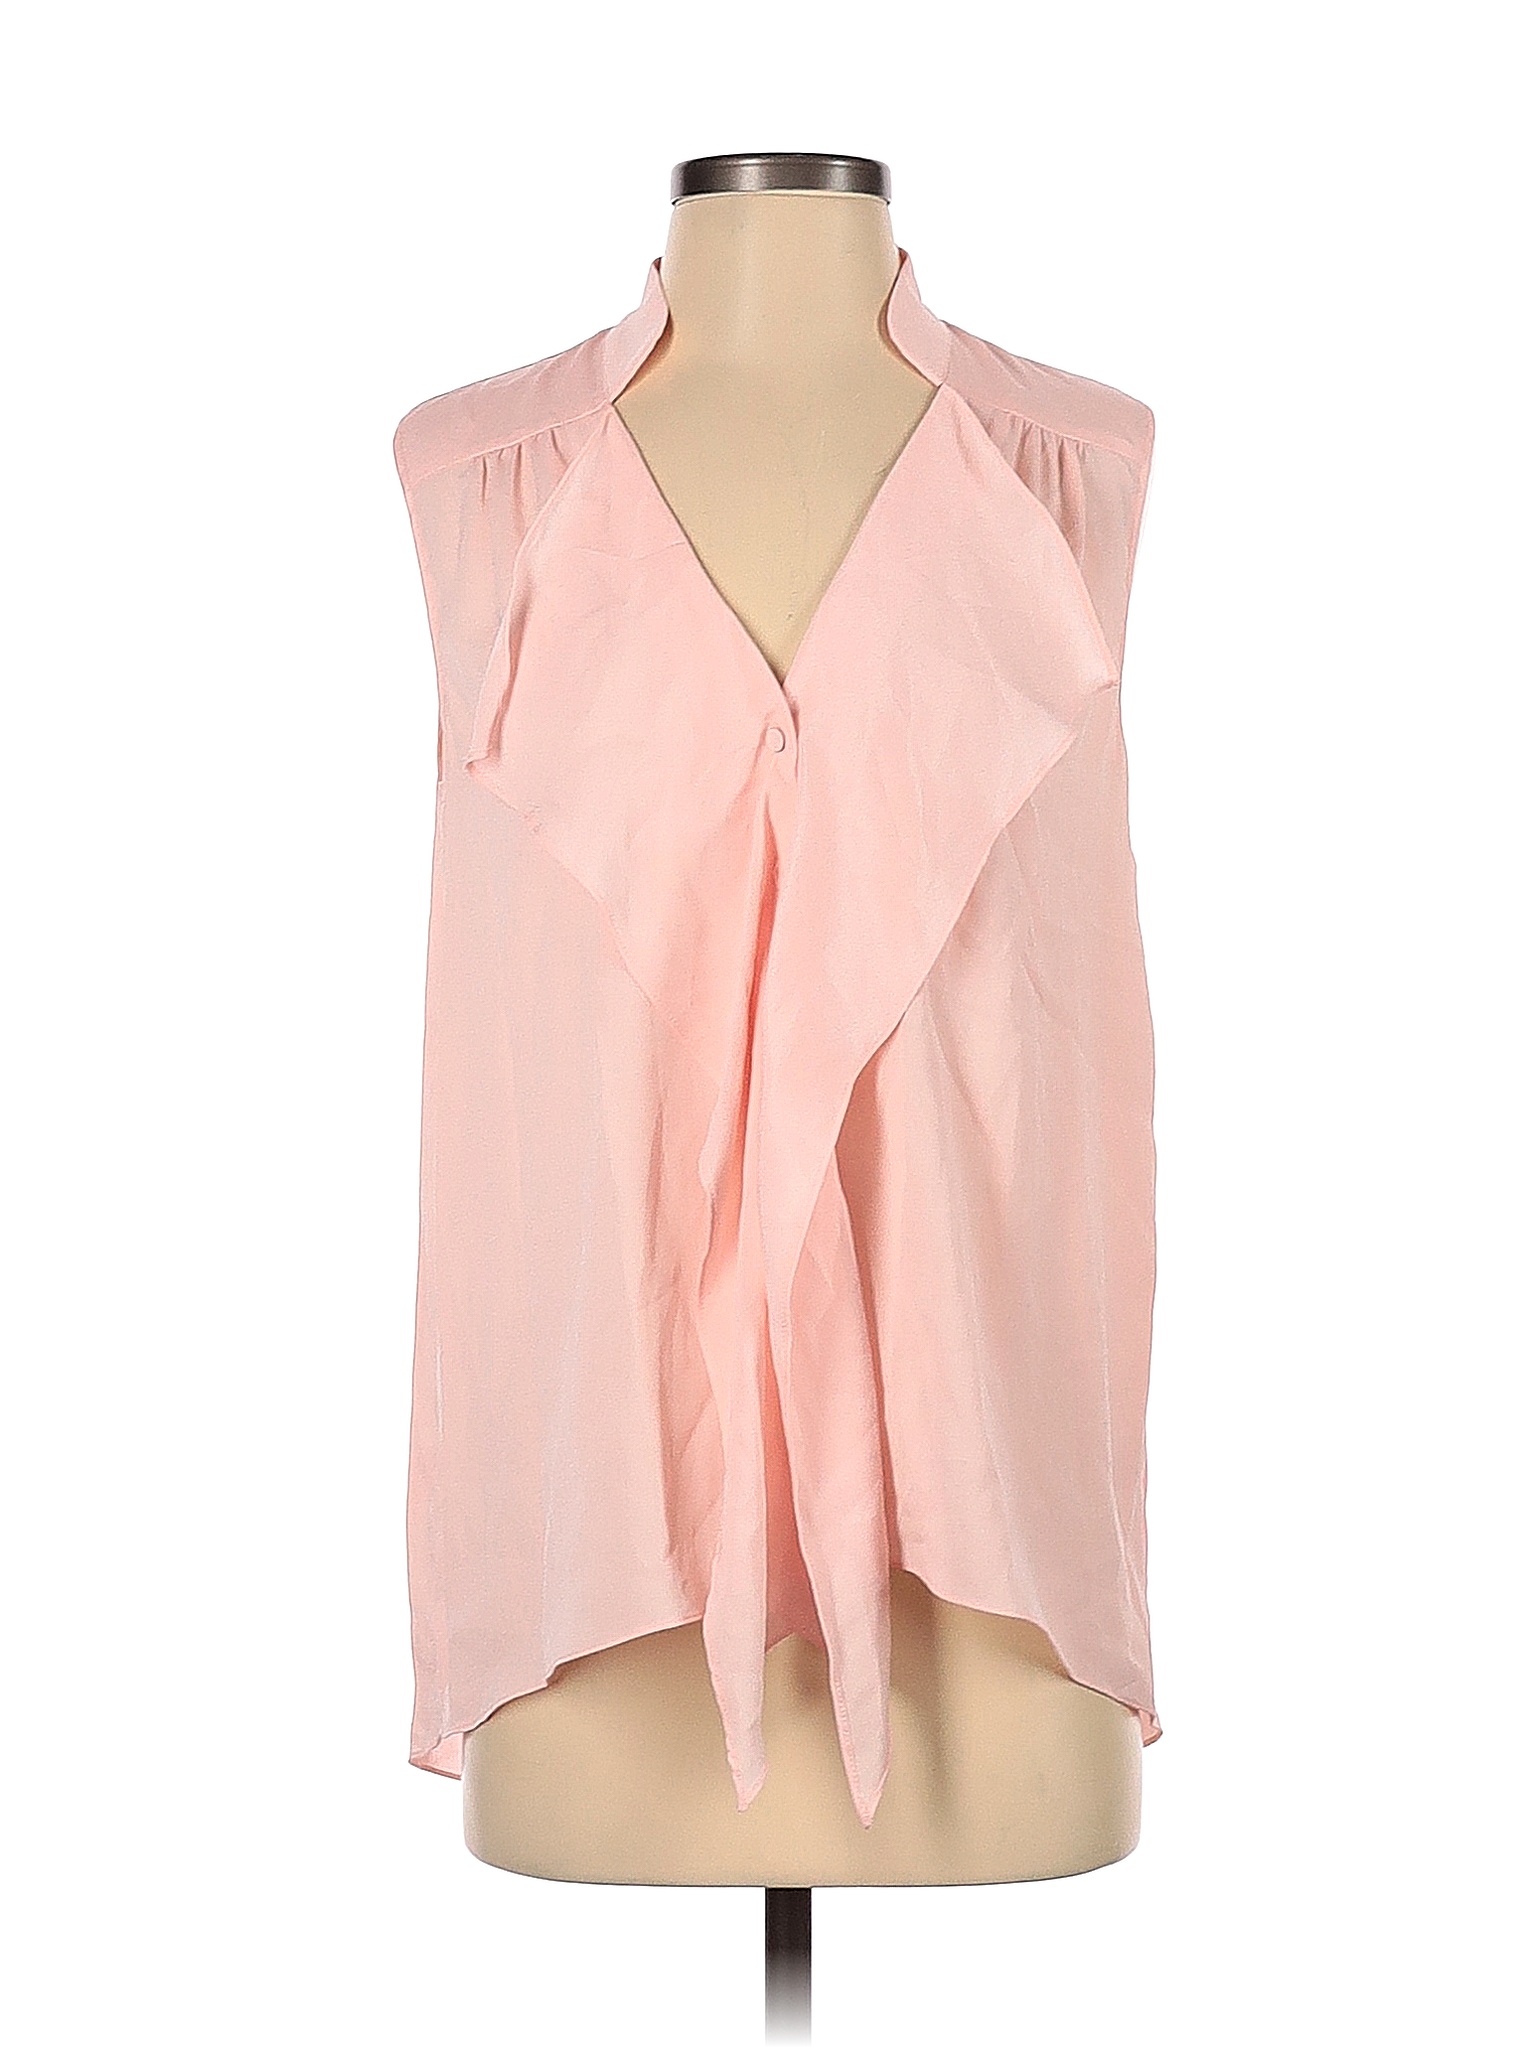 Gianni Bini 100% Polyester Solid Colored Pink Sleeveless Blouse Size S ...